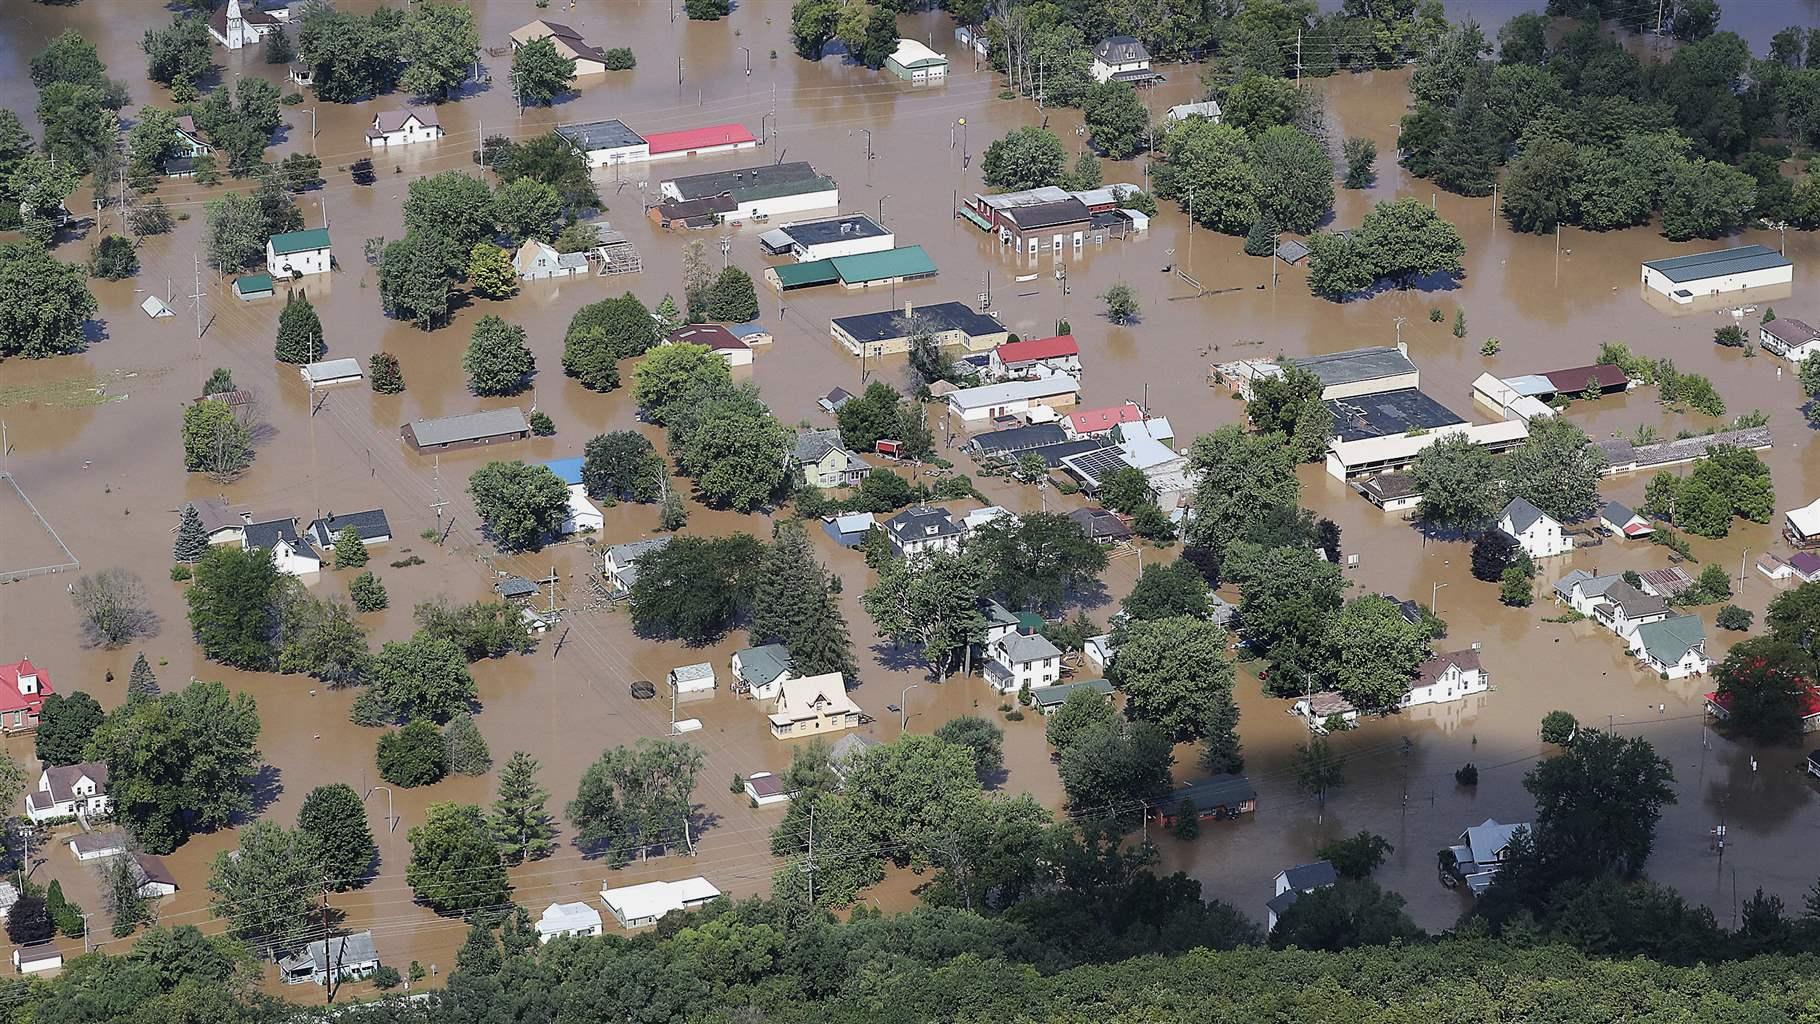 In this Aug. 29, 2018, file photo, flooding is seen in Gays Mills, Wis., following torrential rains that sent the Kickapoo River over its banks the two previous days. Politics dominated Wisconsin&#39;s year in news, with voters deposing Gov. Scott Walker in a midterm kind to Democrats. Walker and leading Republicans didn&#39;t go quietly, drawing national attention for maeneuvering to block their successors from undoing some major policy achievements. The western Wisconsin community of Barron struggled to understand the disappearance of a teenage girl, and much of central and southern Wisconsin dealt with costly damage from widespread flooding. 